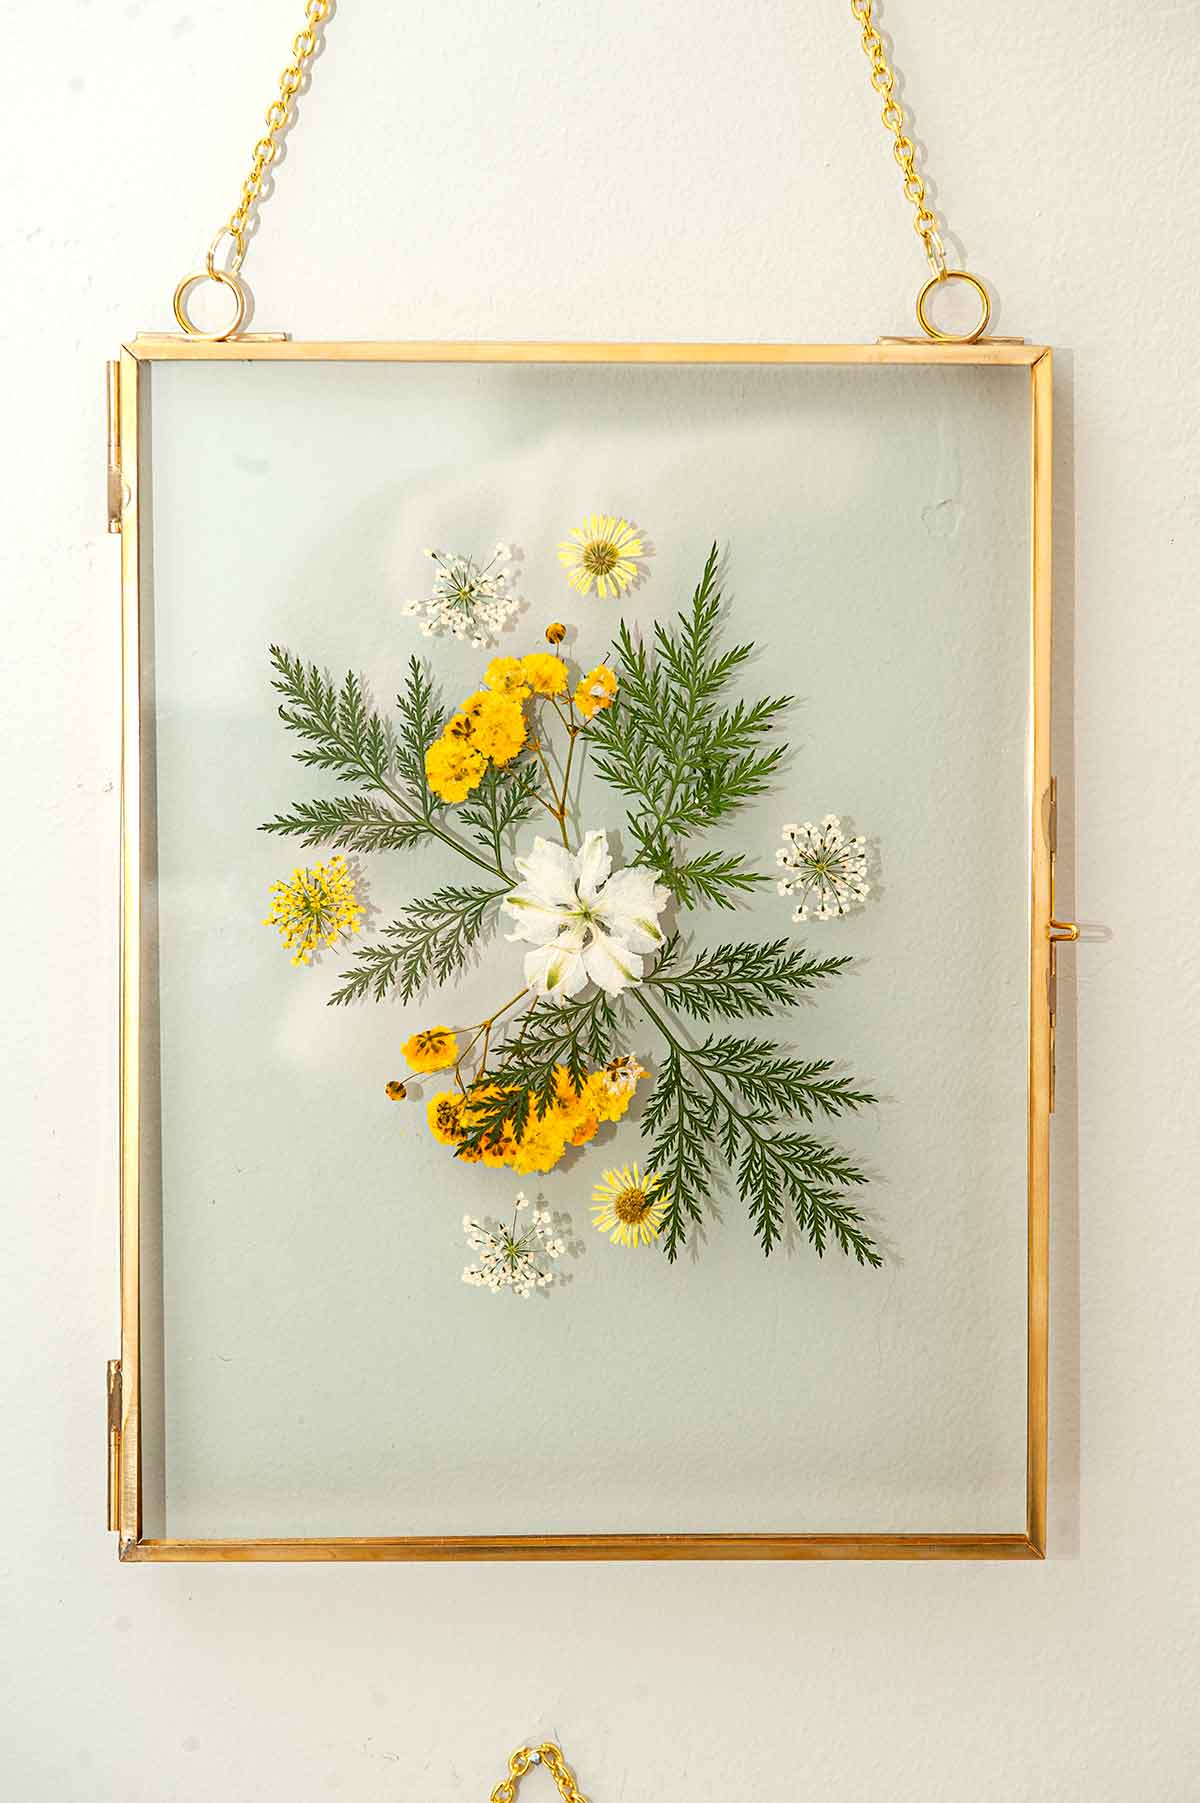 A frame with flowers and leaves on a wall.